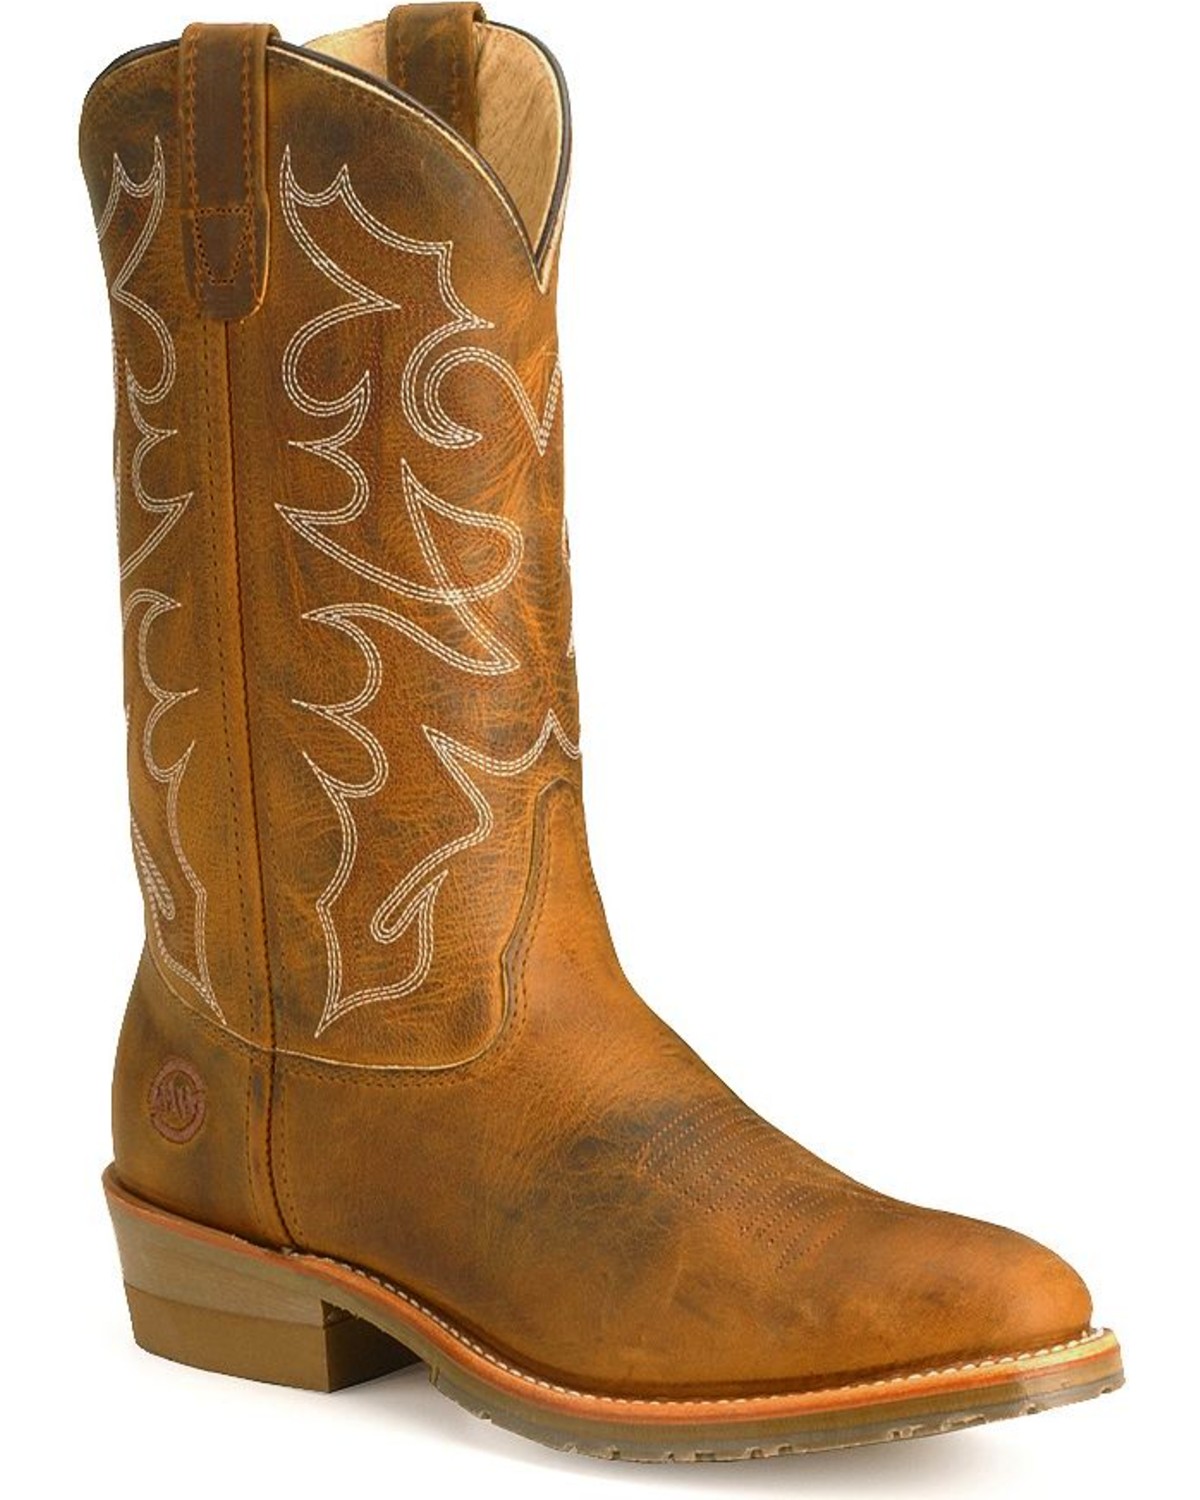 American Cowboy Boots: Made in the USA